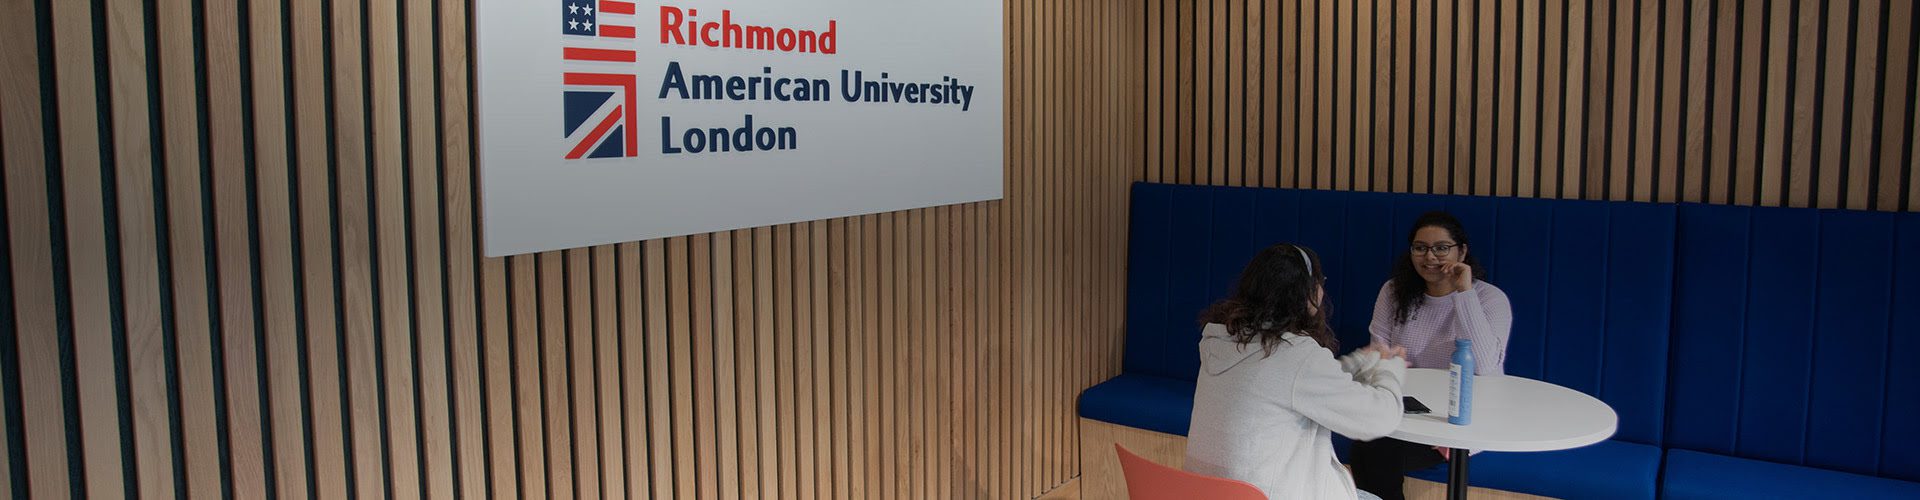 Two people are seated opposite each other at a white table inside a modern room with wooden slats and a sign for 快活视频 American University London.